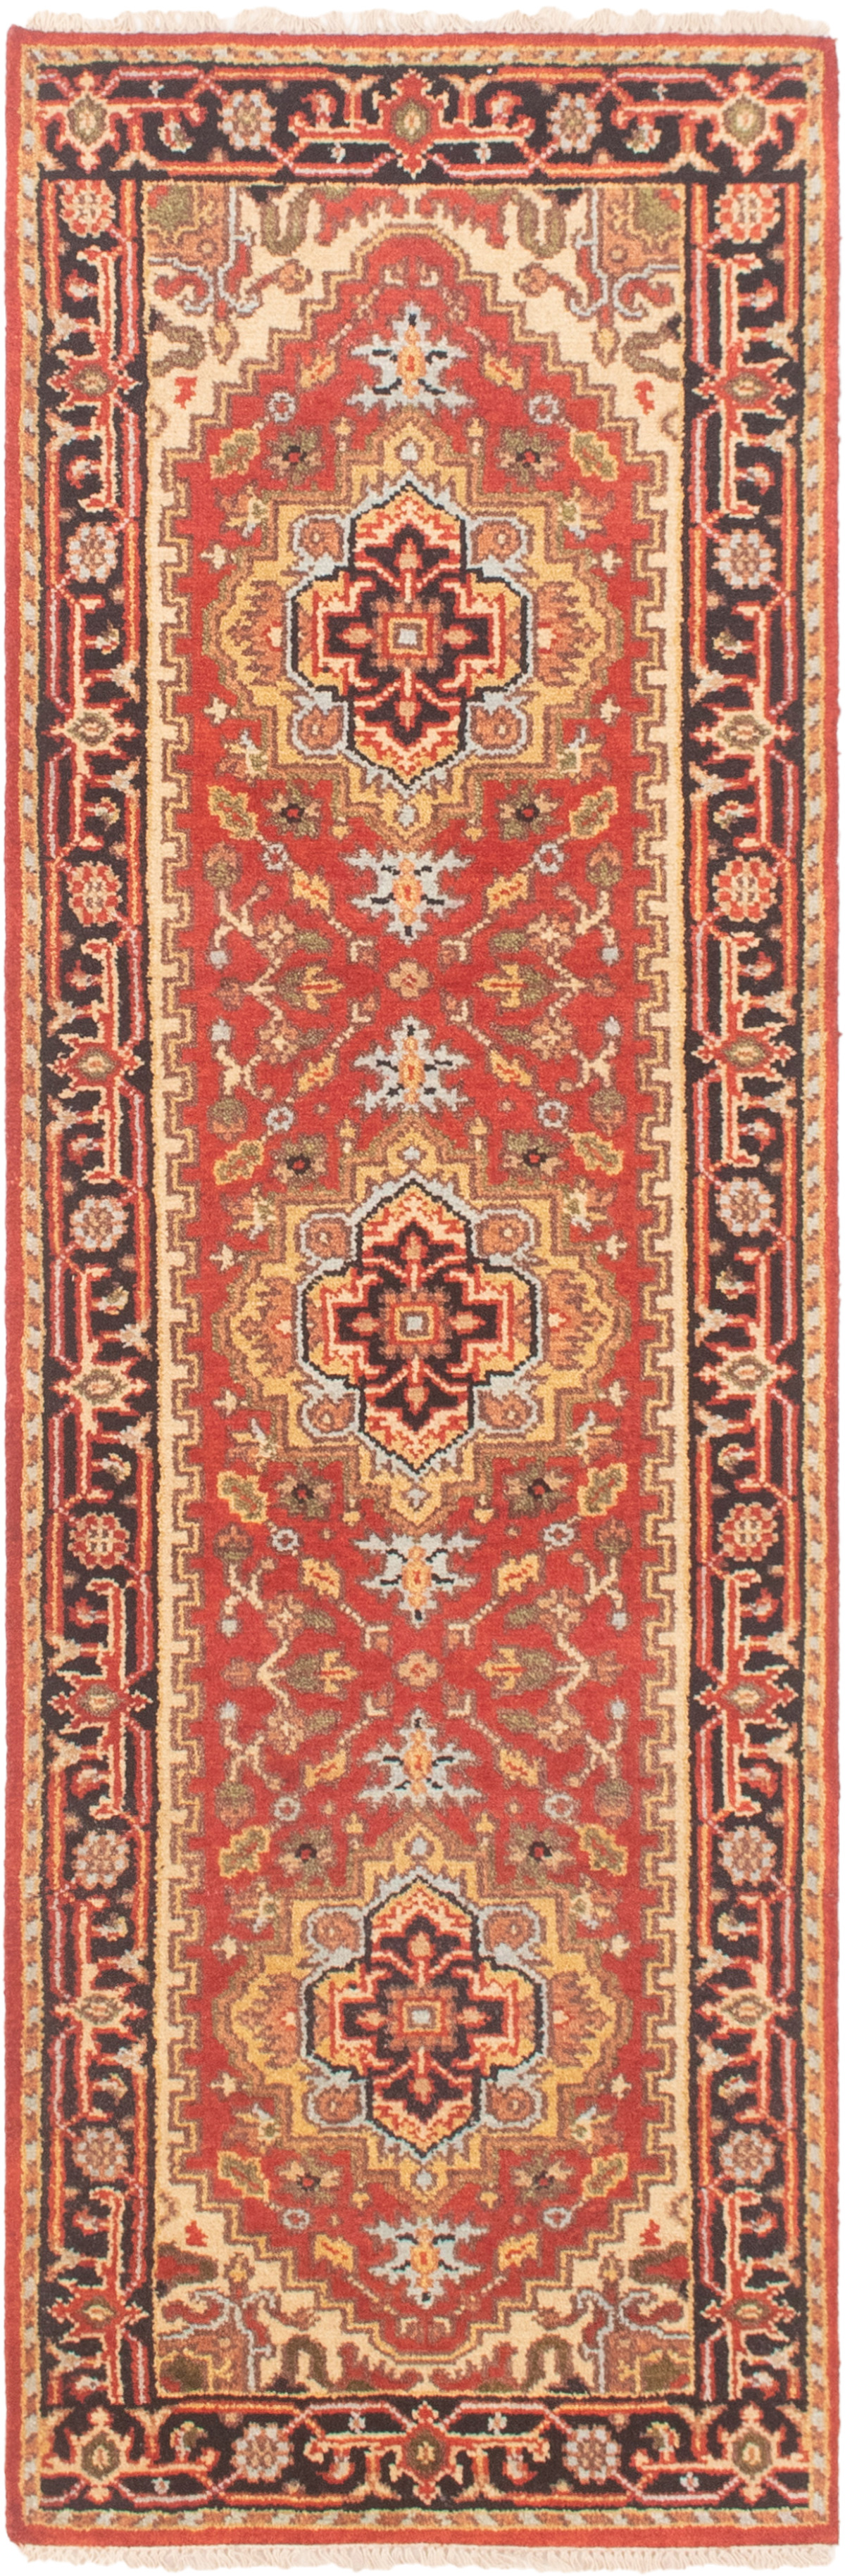 Hand-knotted Serapi Heritage Dark Copper Wool Rug 2'5" x 7'10"  Size: 2'5" x 7'10"  